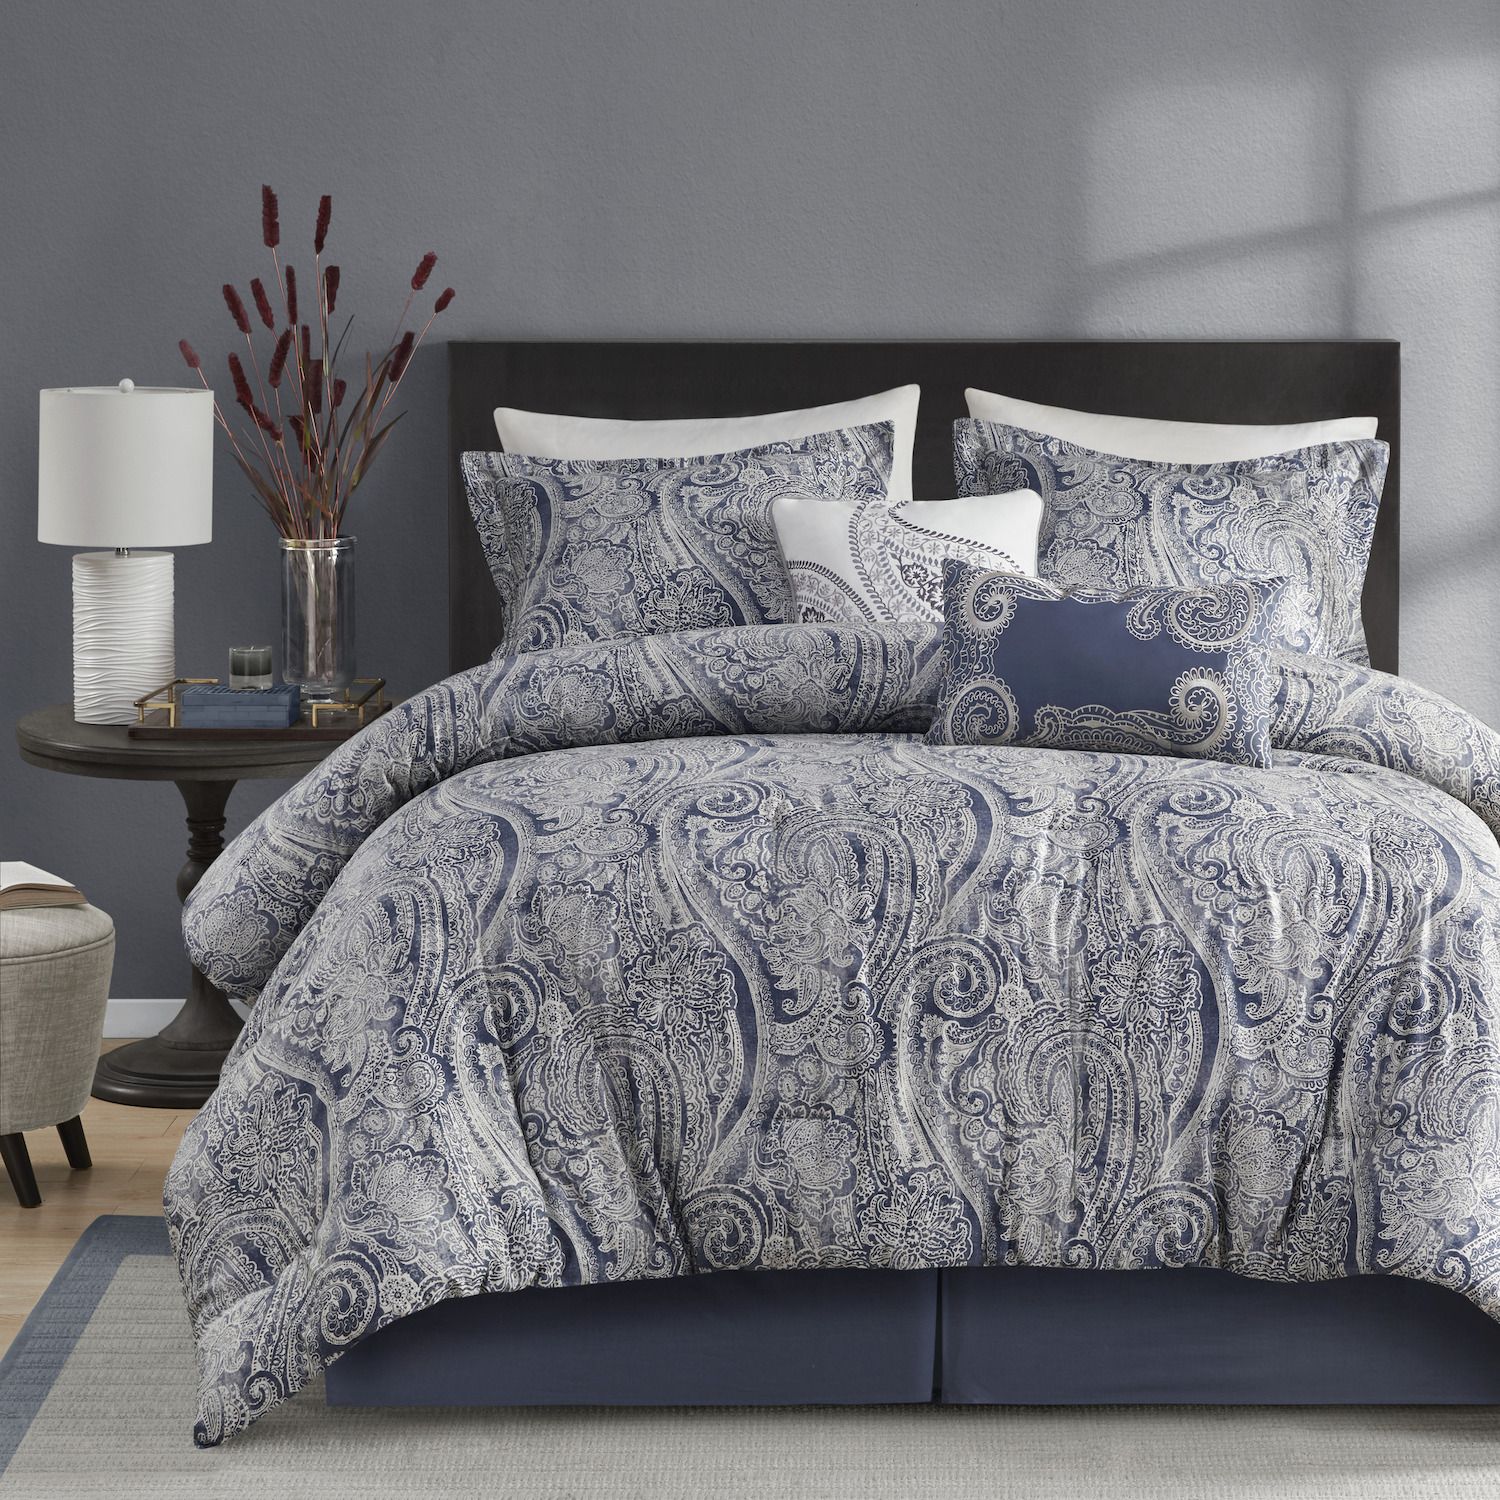 Image for Harbor House 6-piece Stella 300 Thread Count Comforter Set at Kohl's.